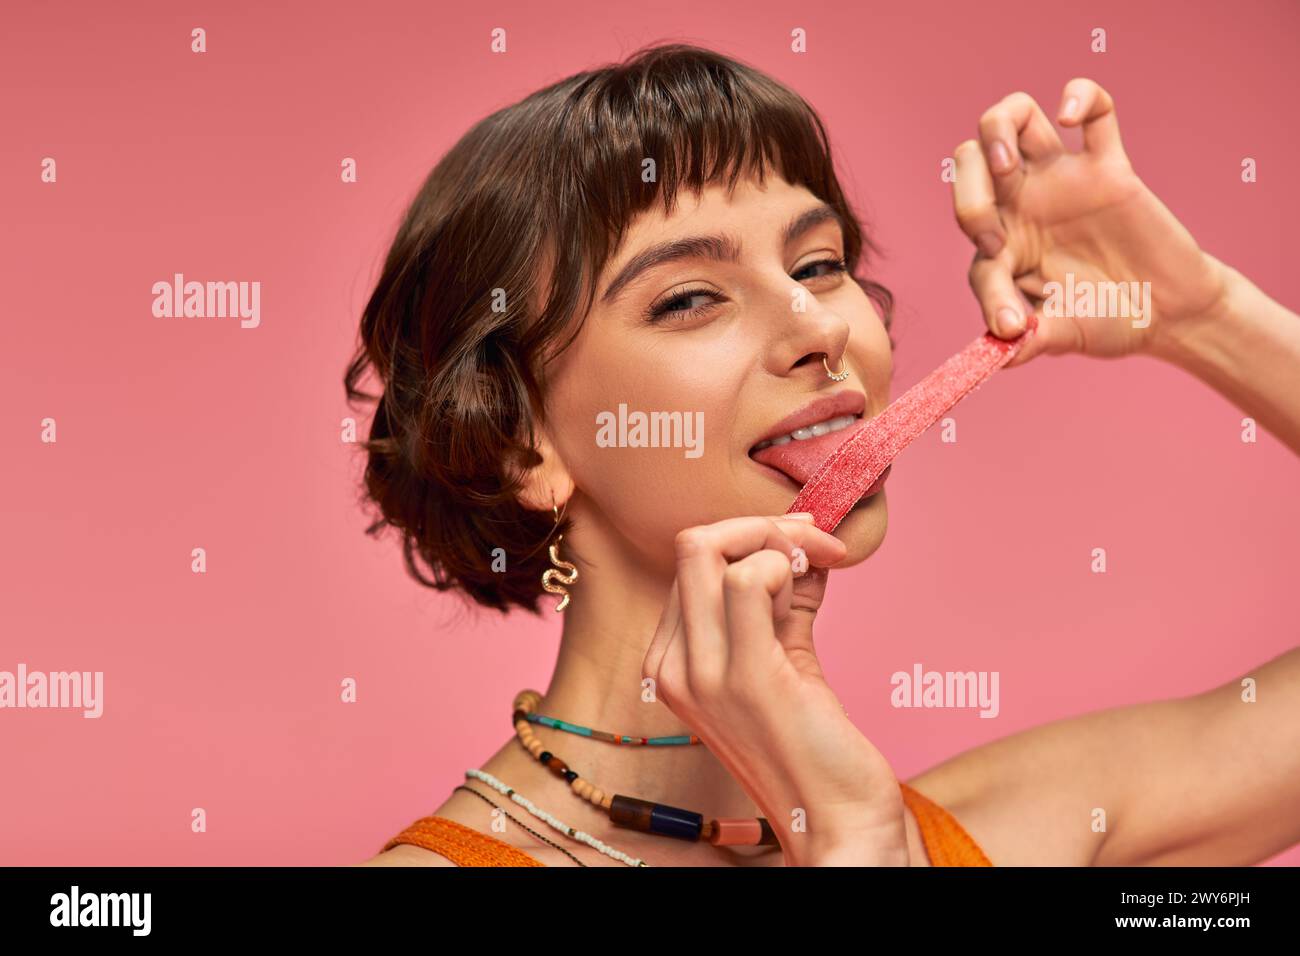 cheerful and young woman with nose piercing licking sweet and sour candy strip on pink background Stock Photo